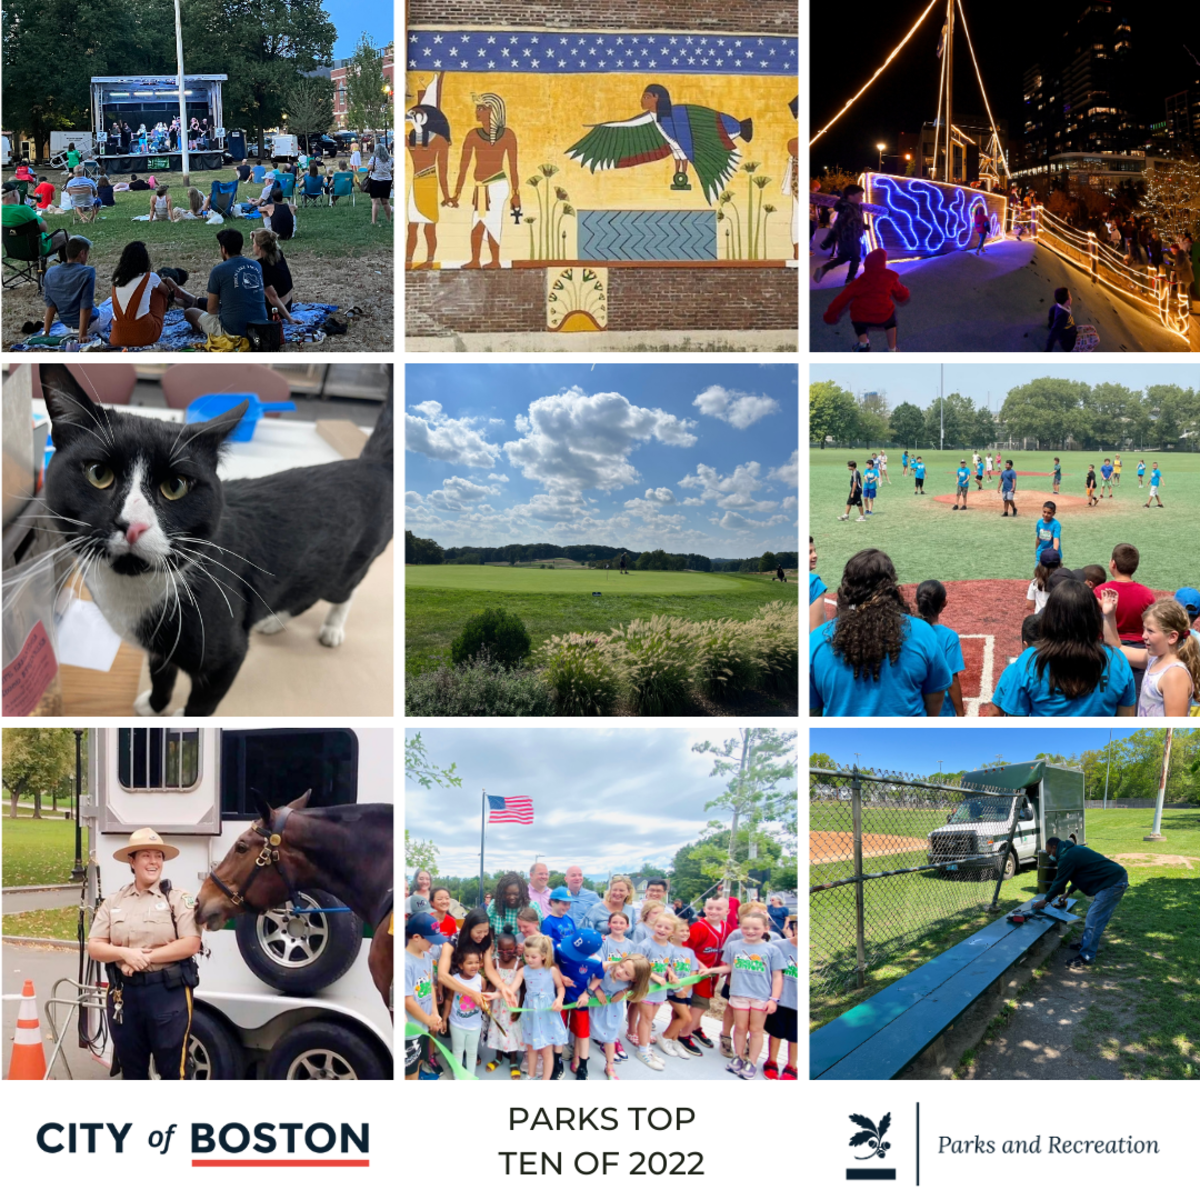 Parks top ten of 2022 grid. Concert in a park, painting of King Tut, and Martins Park lit up with lights. Black and white cat, golf course on a sunny day, and kids playing baseball. Park ranger and a horse, families cutting a ribbon in a park, and a worker painting a bench.